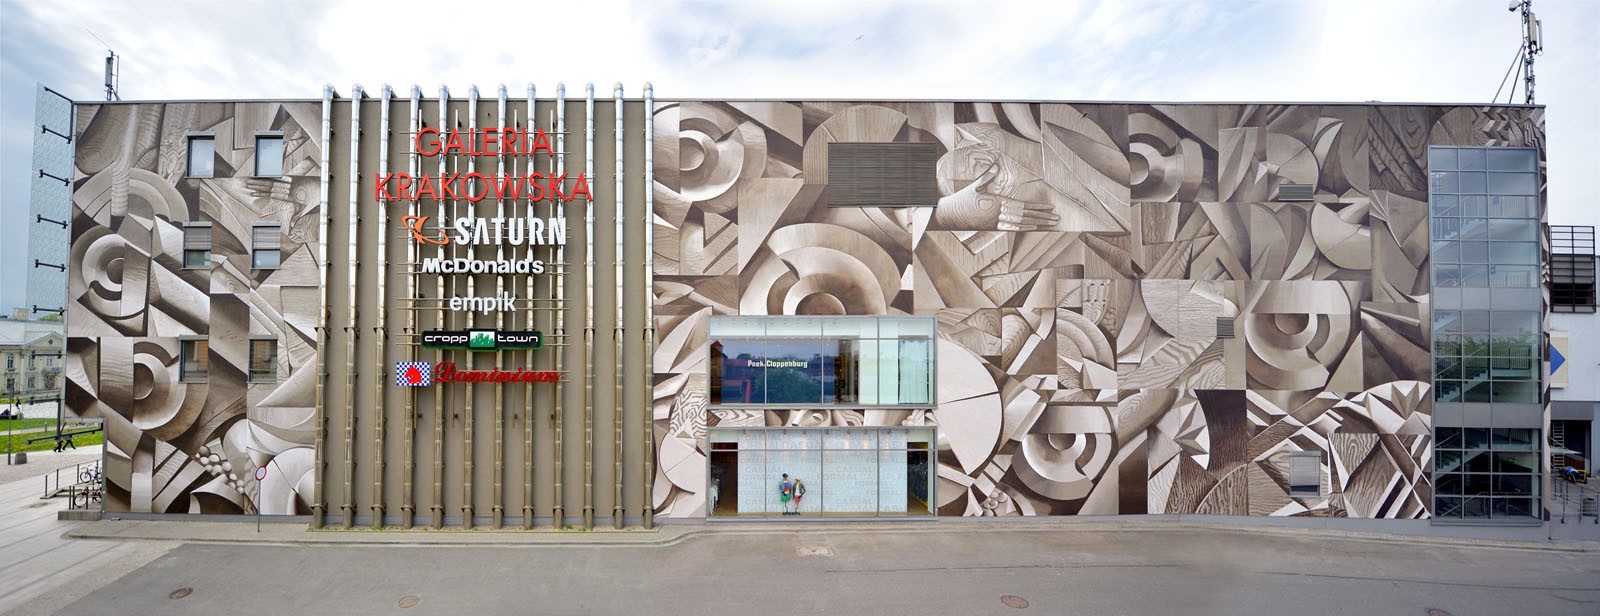 Galeria Krakowska mural in Cracow shopping mall Pawia street | Artistic Murals | Our offer